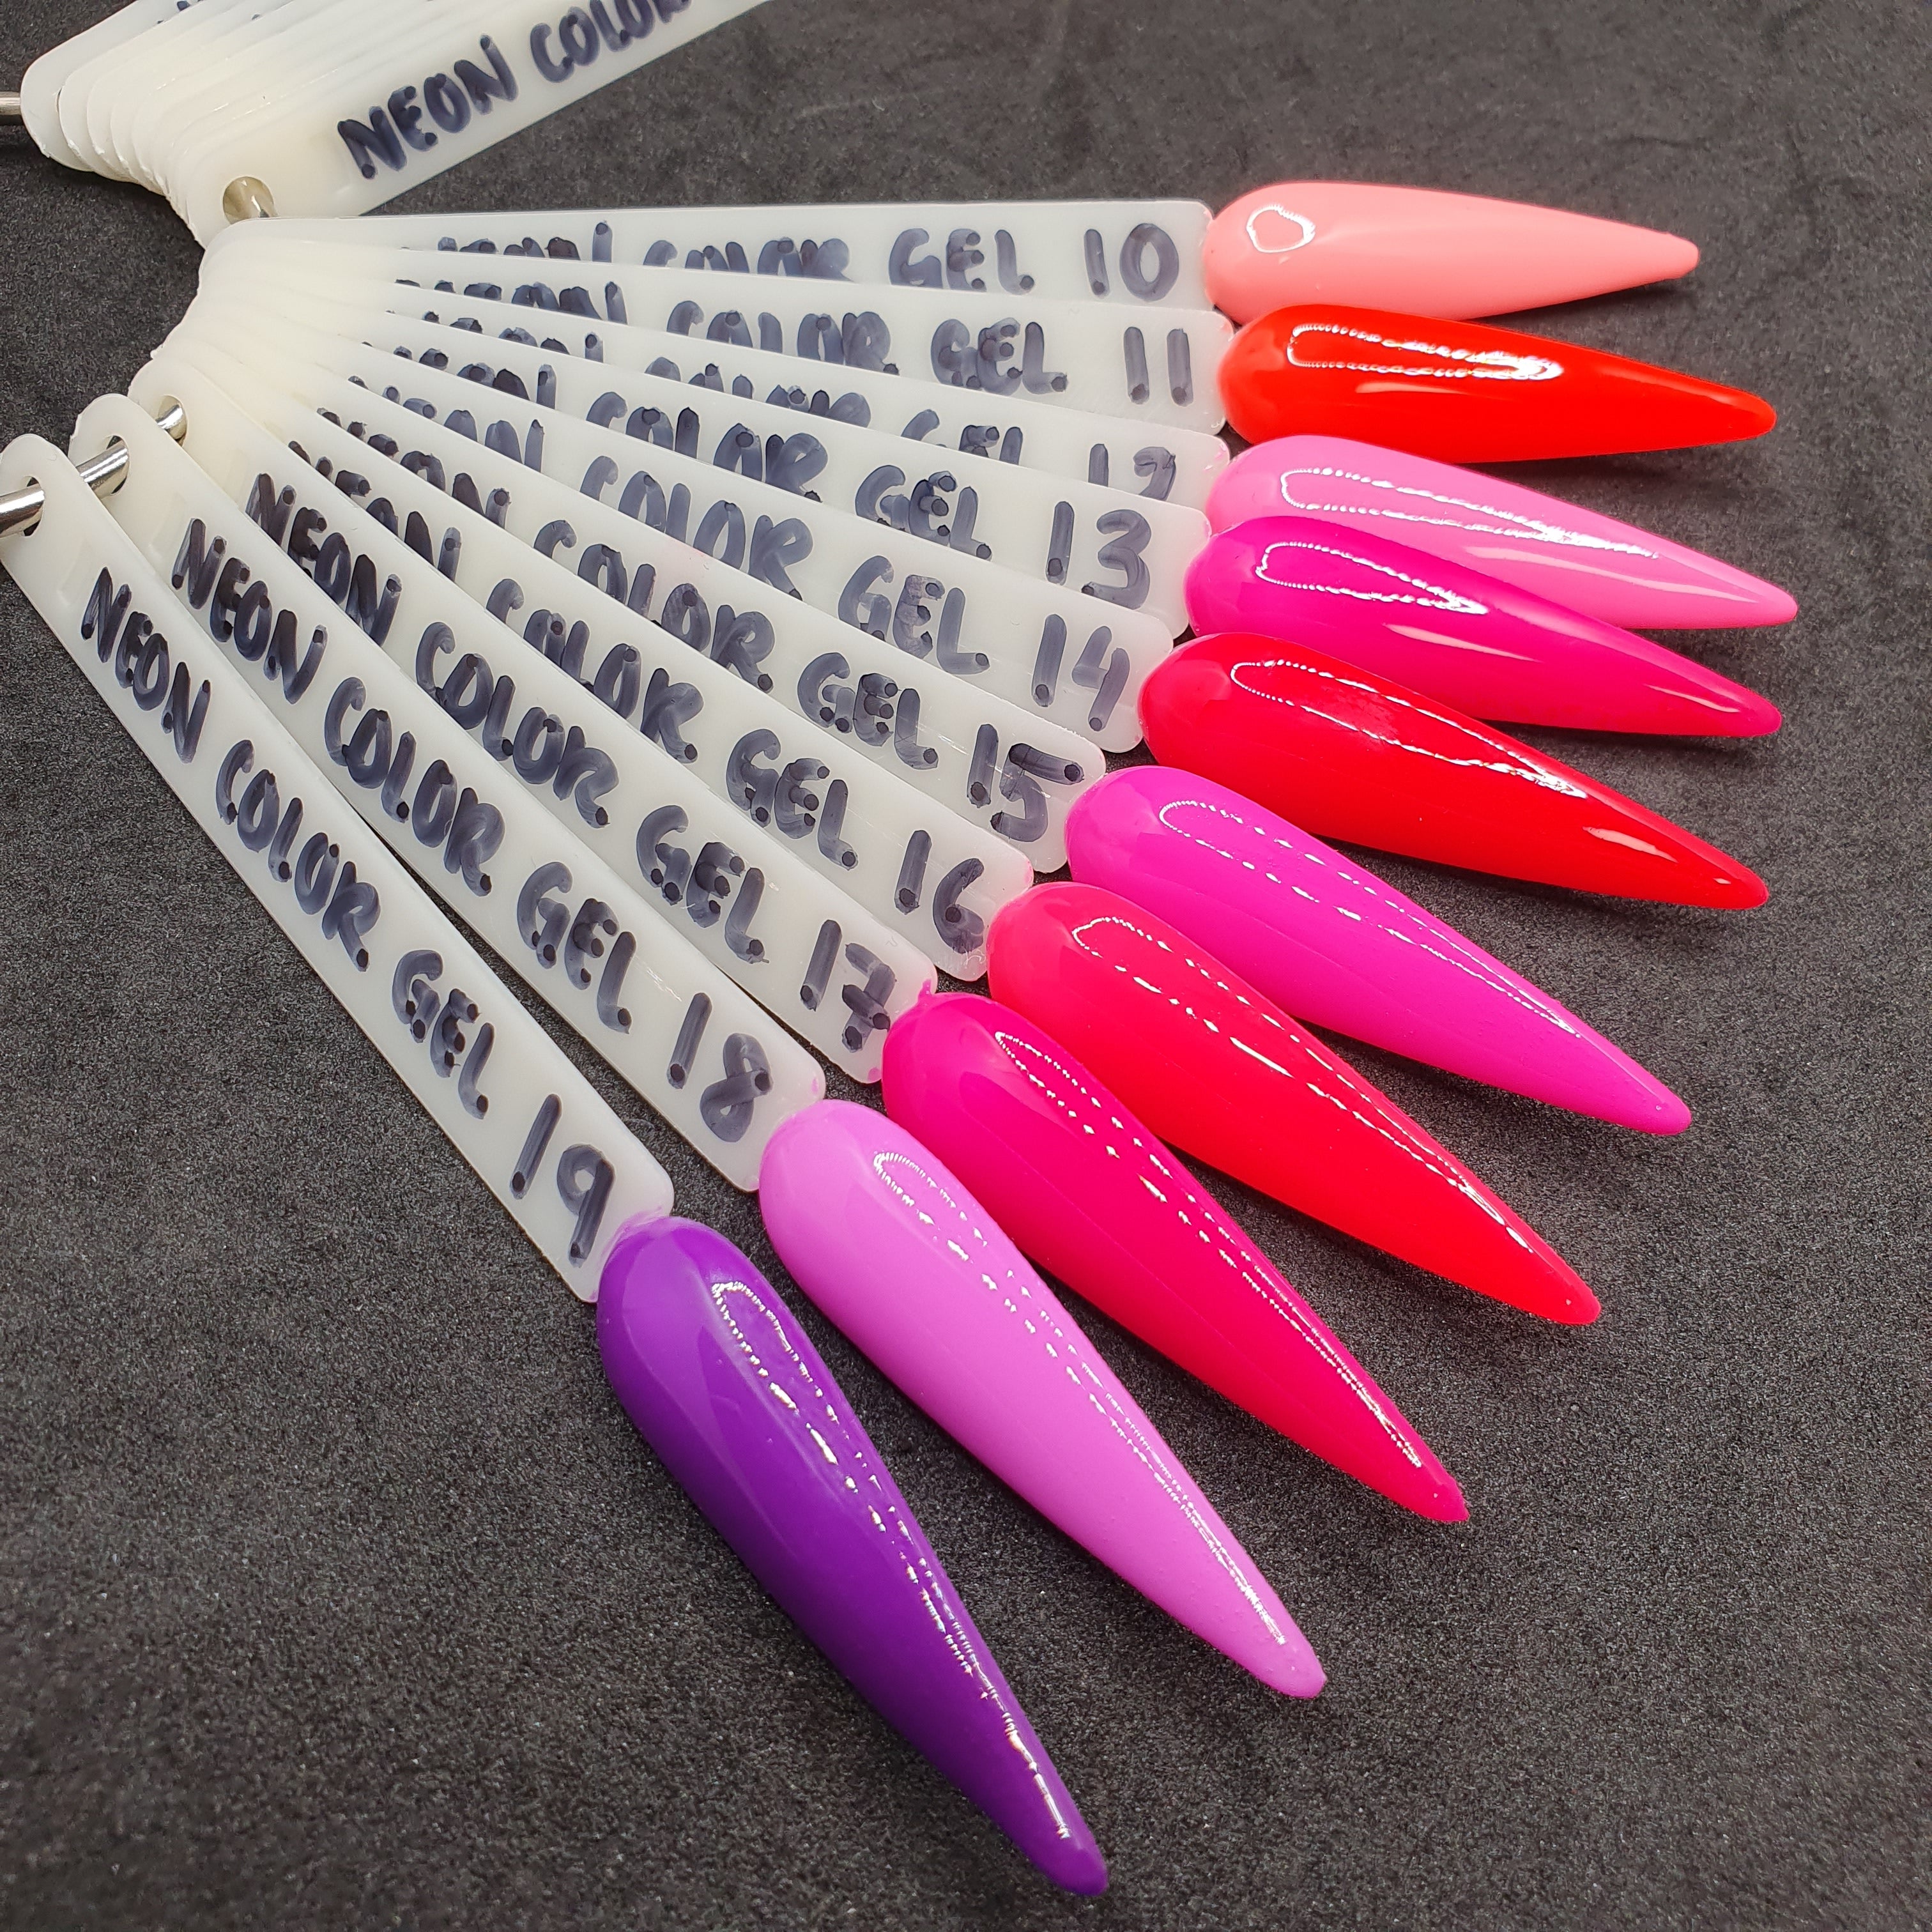 NEW - GND NEON GEL COLOR - 11